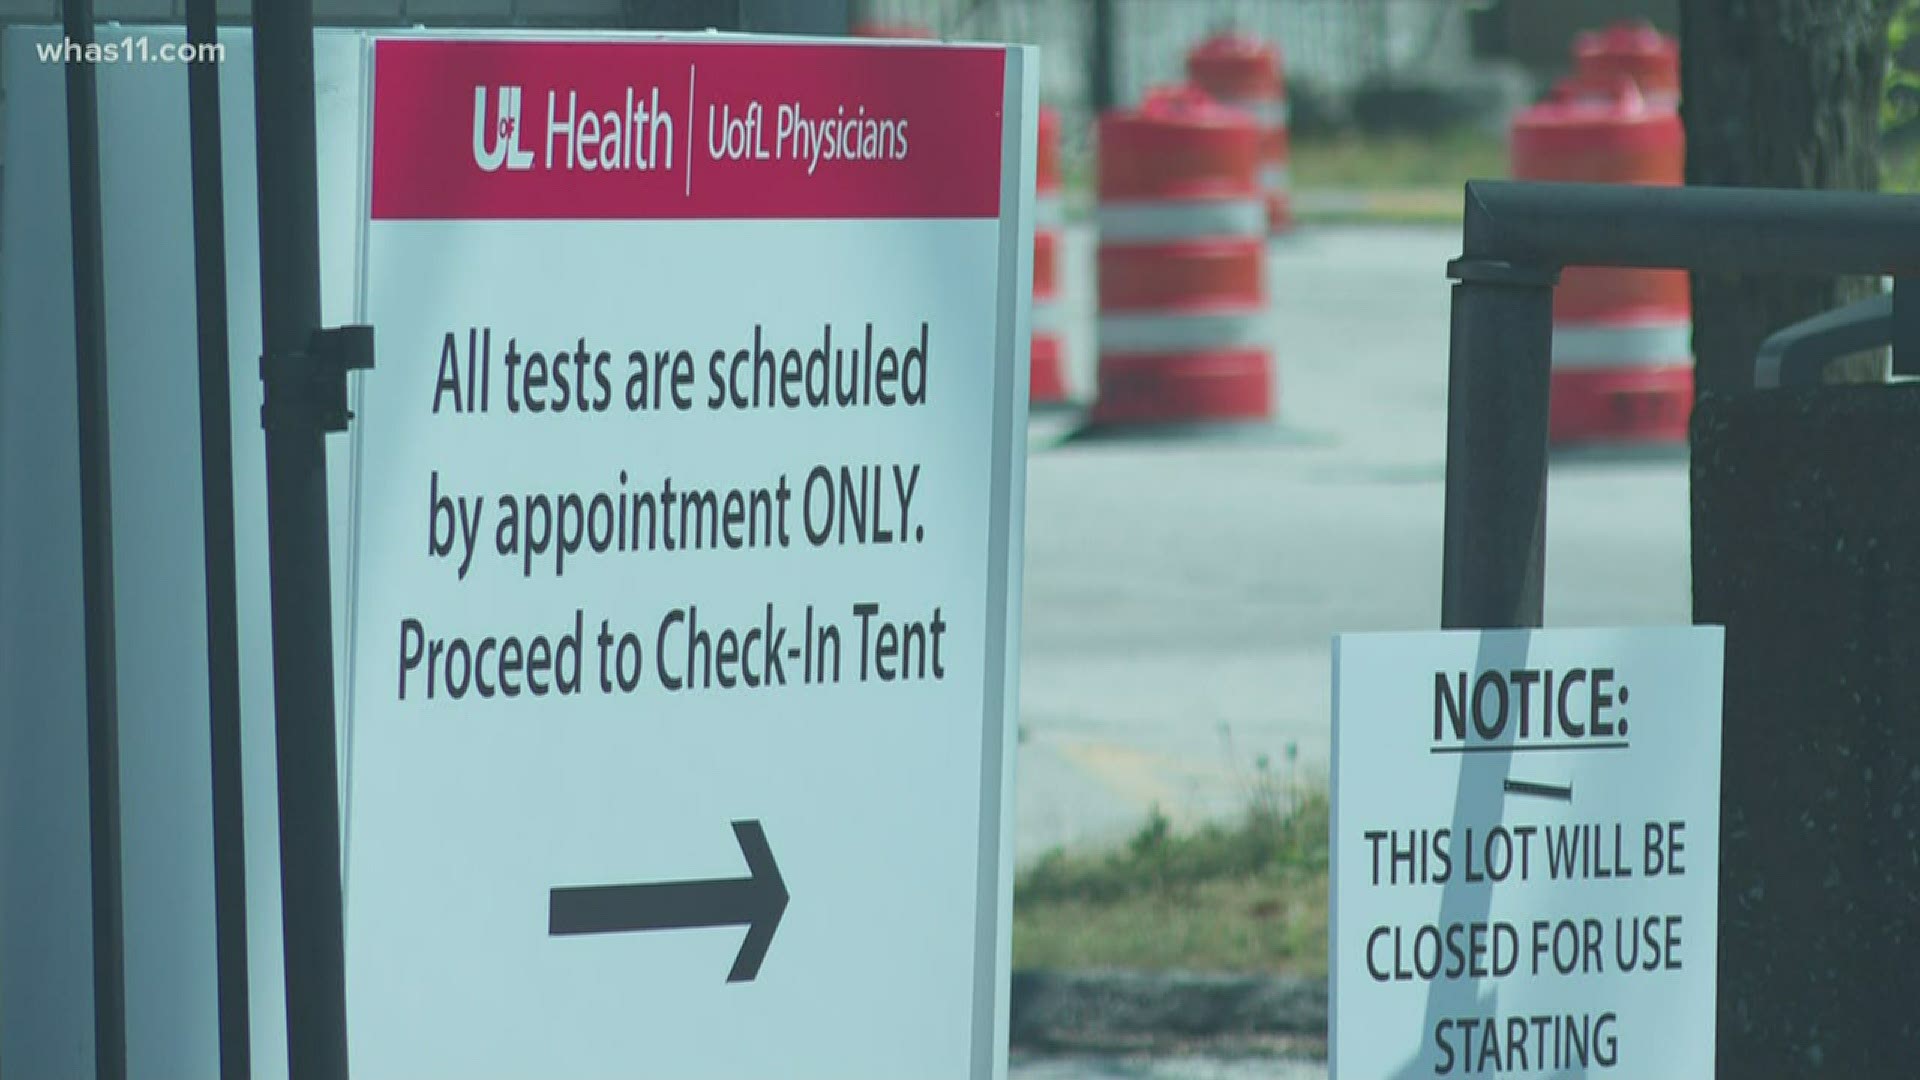 So far, University of Louisville Health has tested 307 patients at its drive-thru testing site, with 36 tests coming back positive.